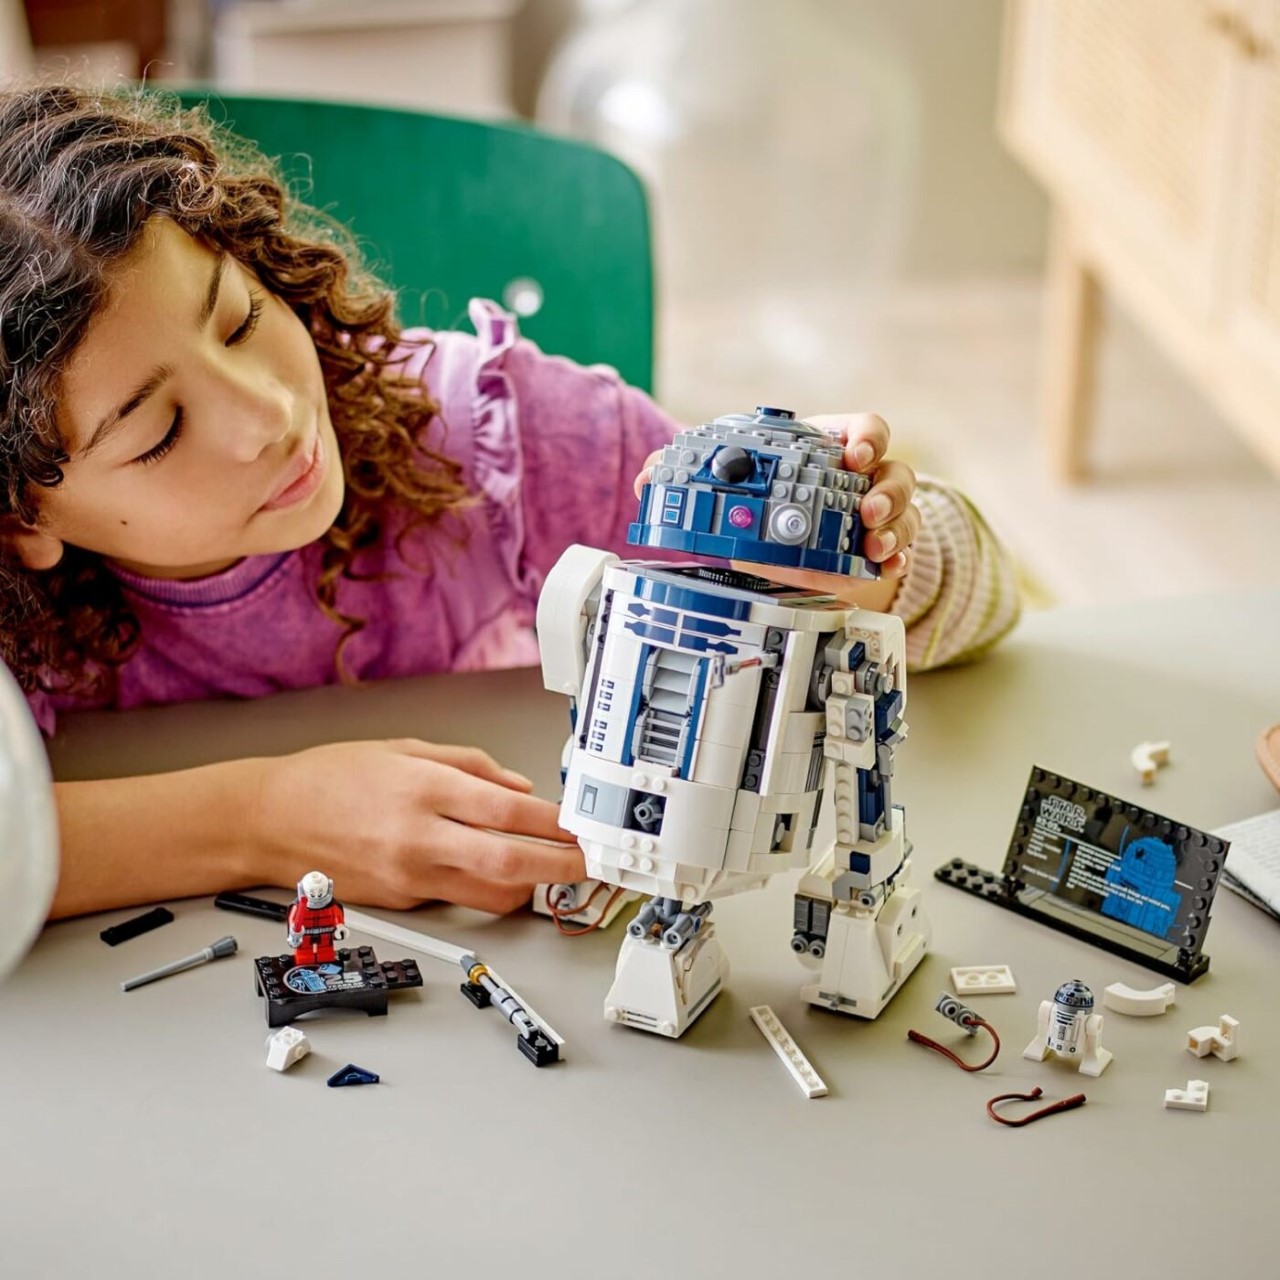 We Build the LEGO R2-D2, a Challenging Build with an Adorable